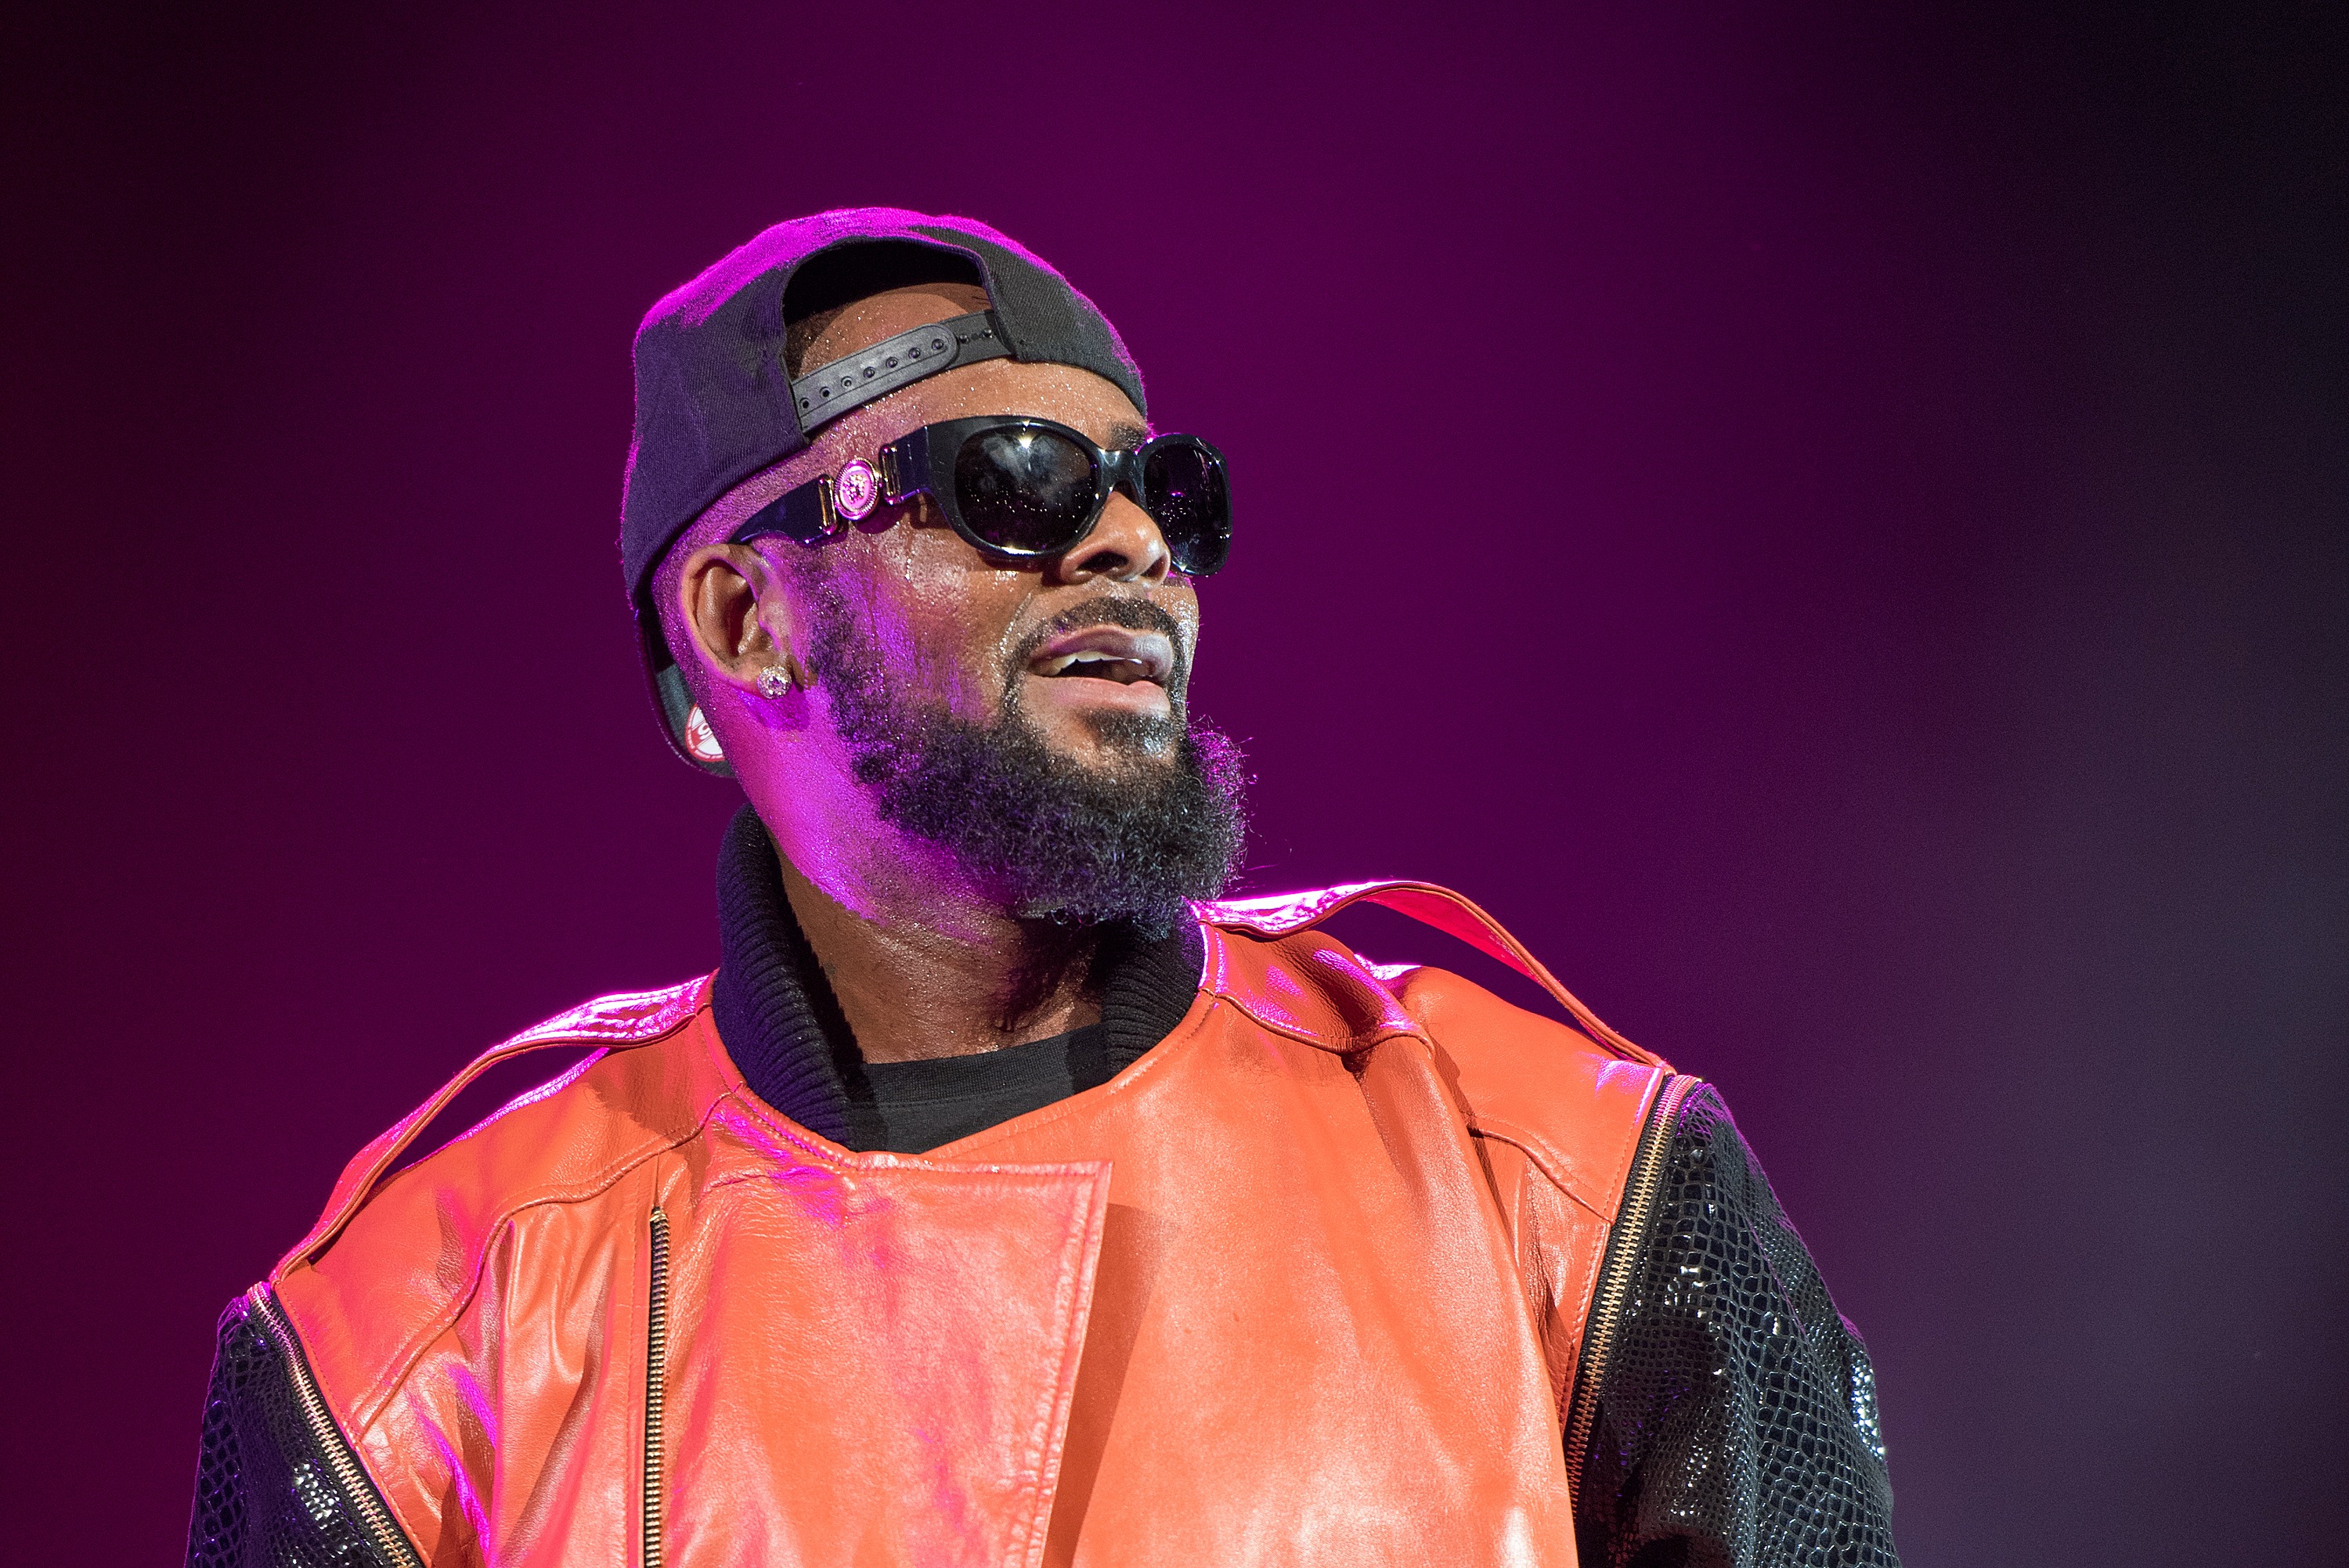 R. Kelly Released From Jail After Posting $100K Bond